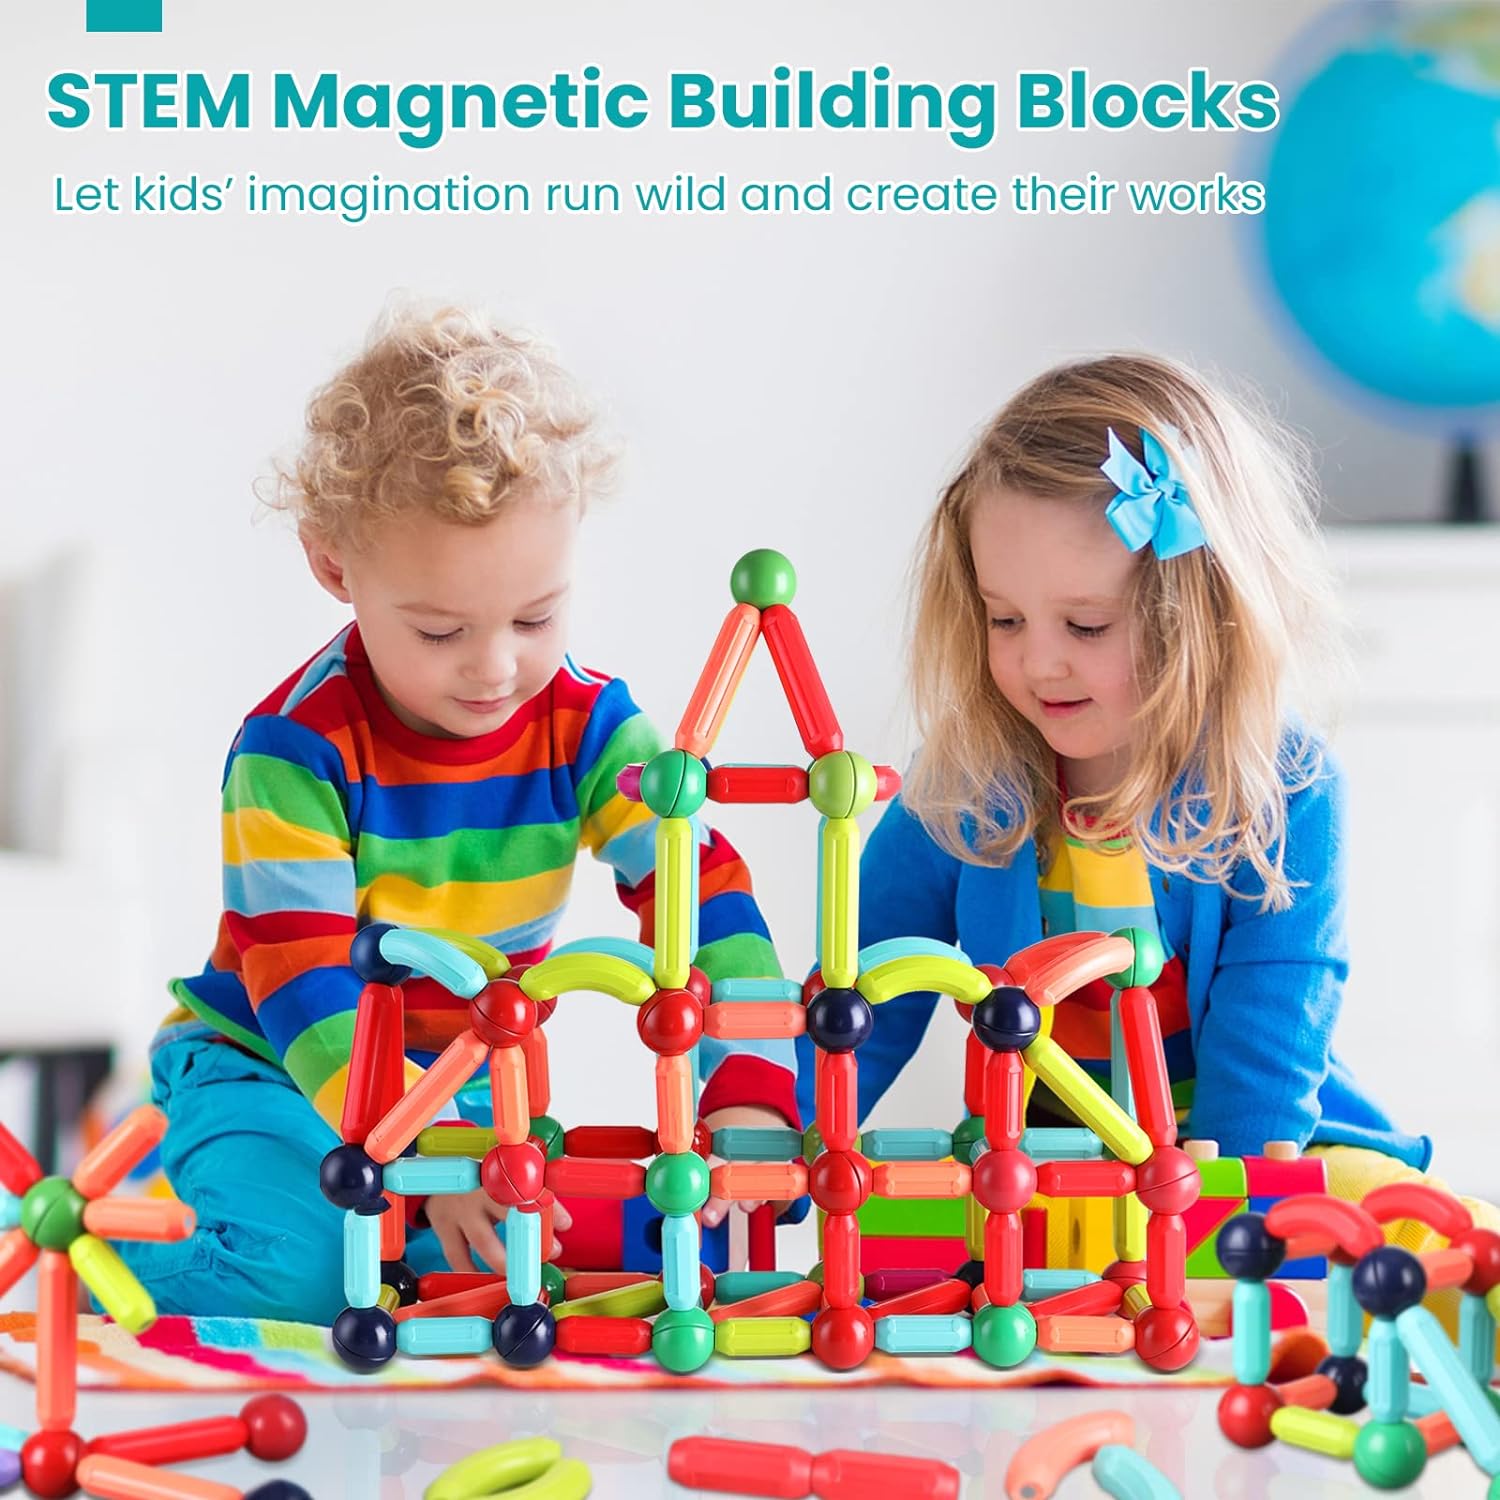 BAKAM Magnetic Building Blocks for Kids Ages 4-8, STEM Construction Toys for Boys and Girls, Large Size Magnetic Sticks and Balls Game Set for Kid’s Early Educational Learning (64PCS)